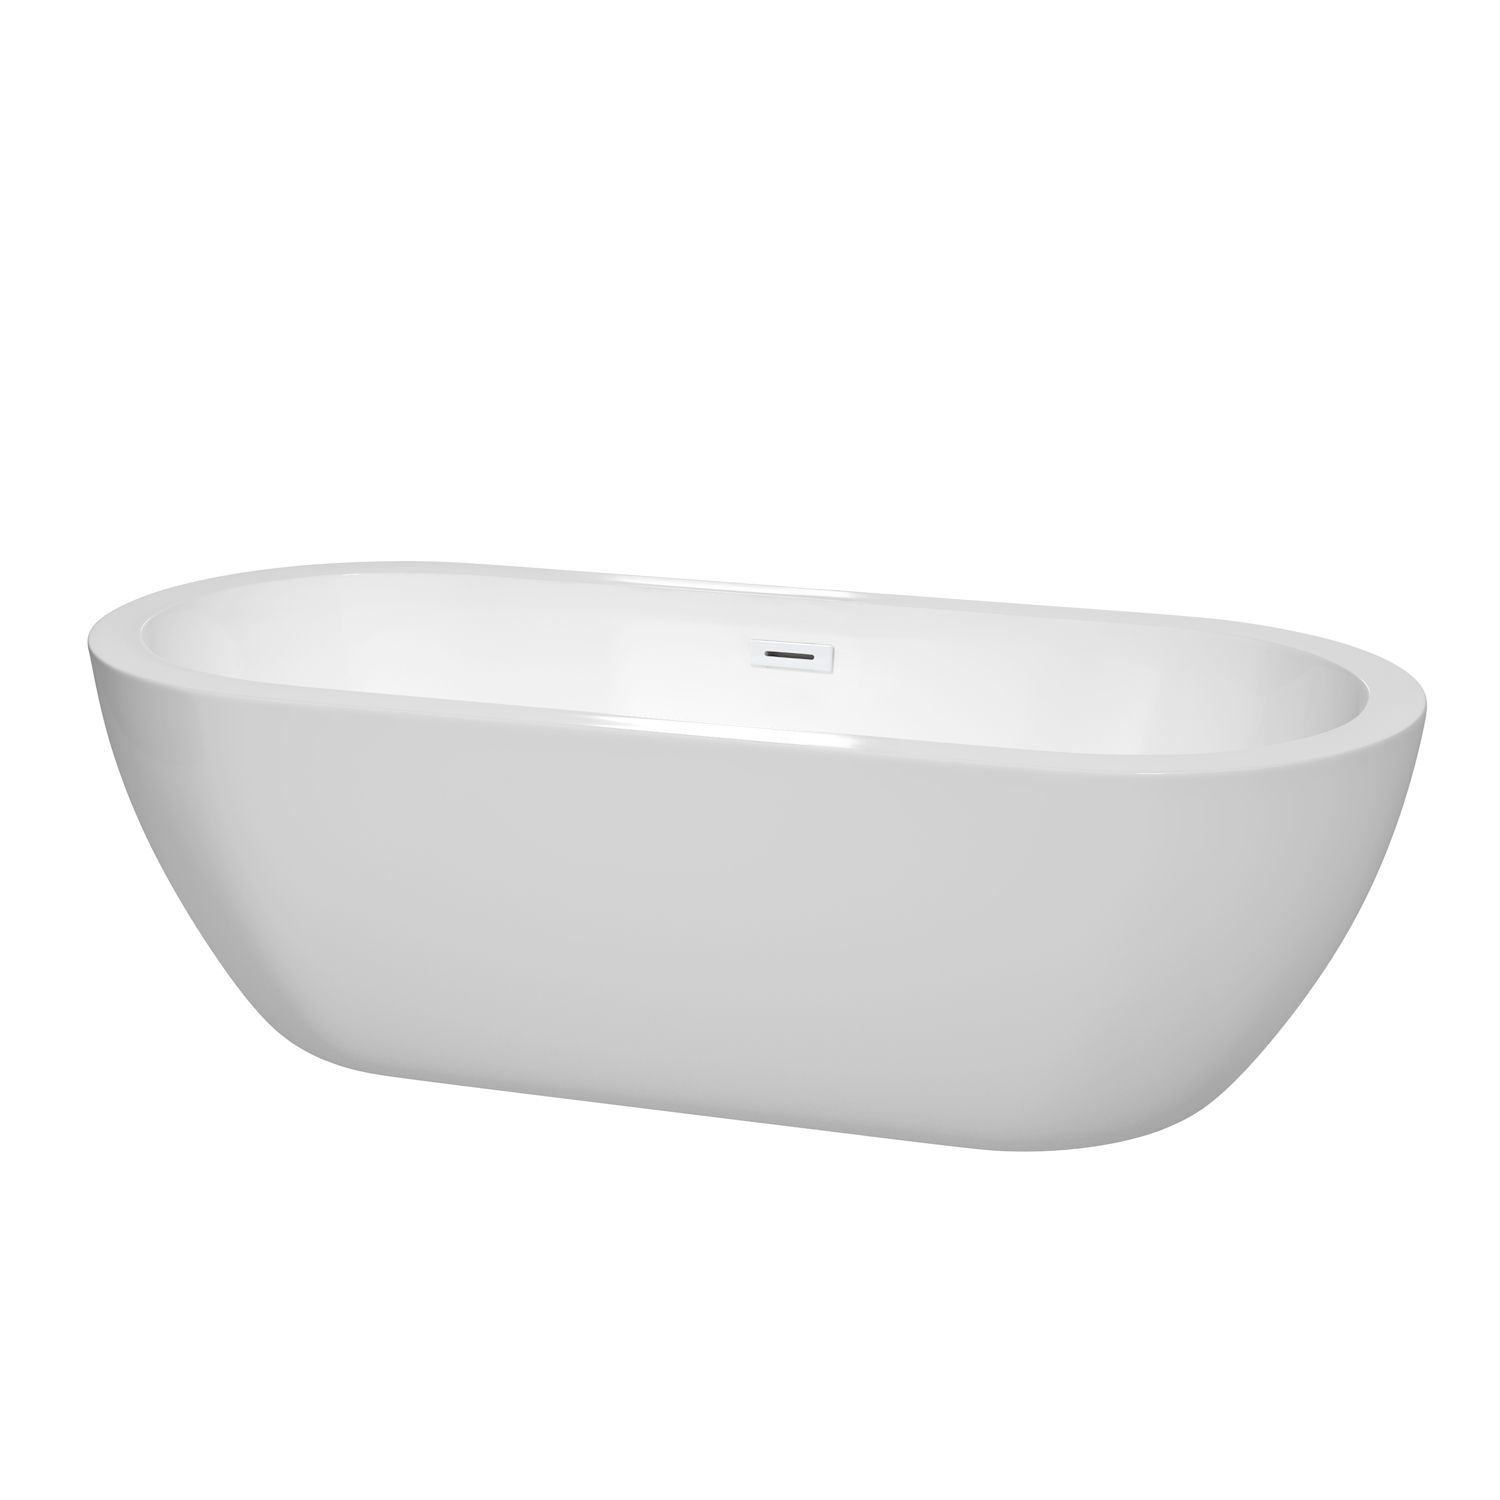 72" Freestanding Bathtub in White with Shiny White Drain and Overflow Trim